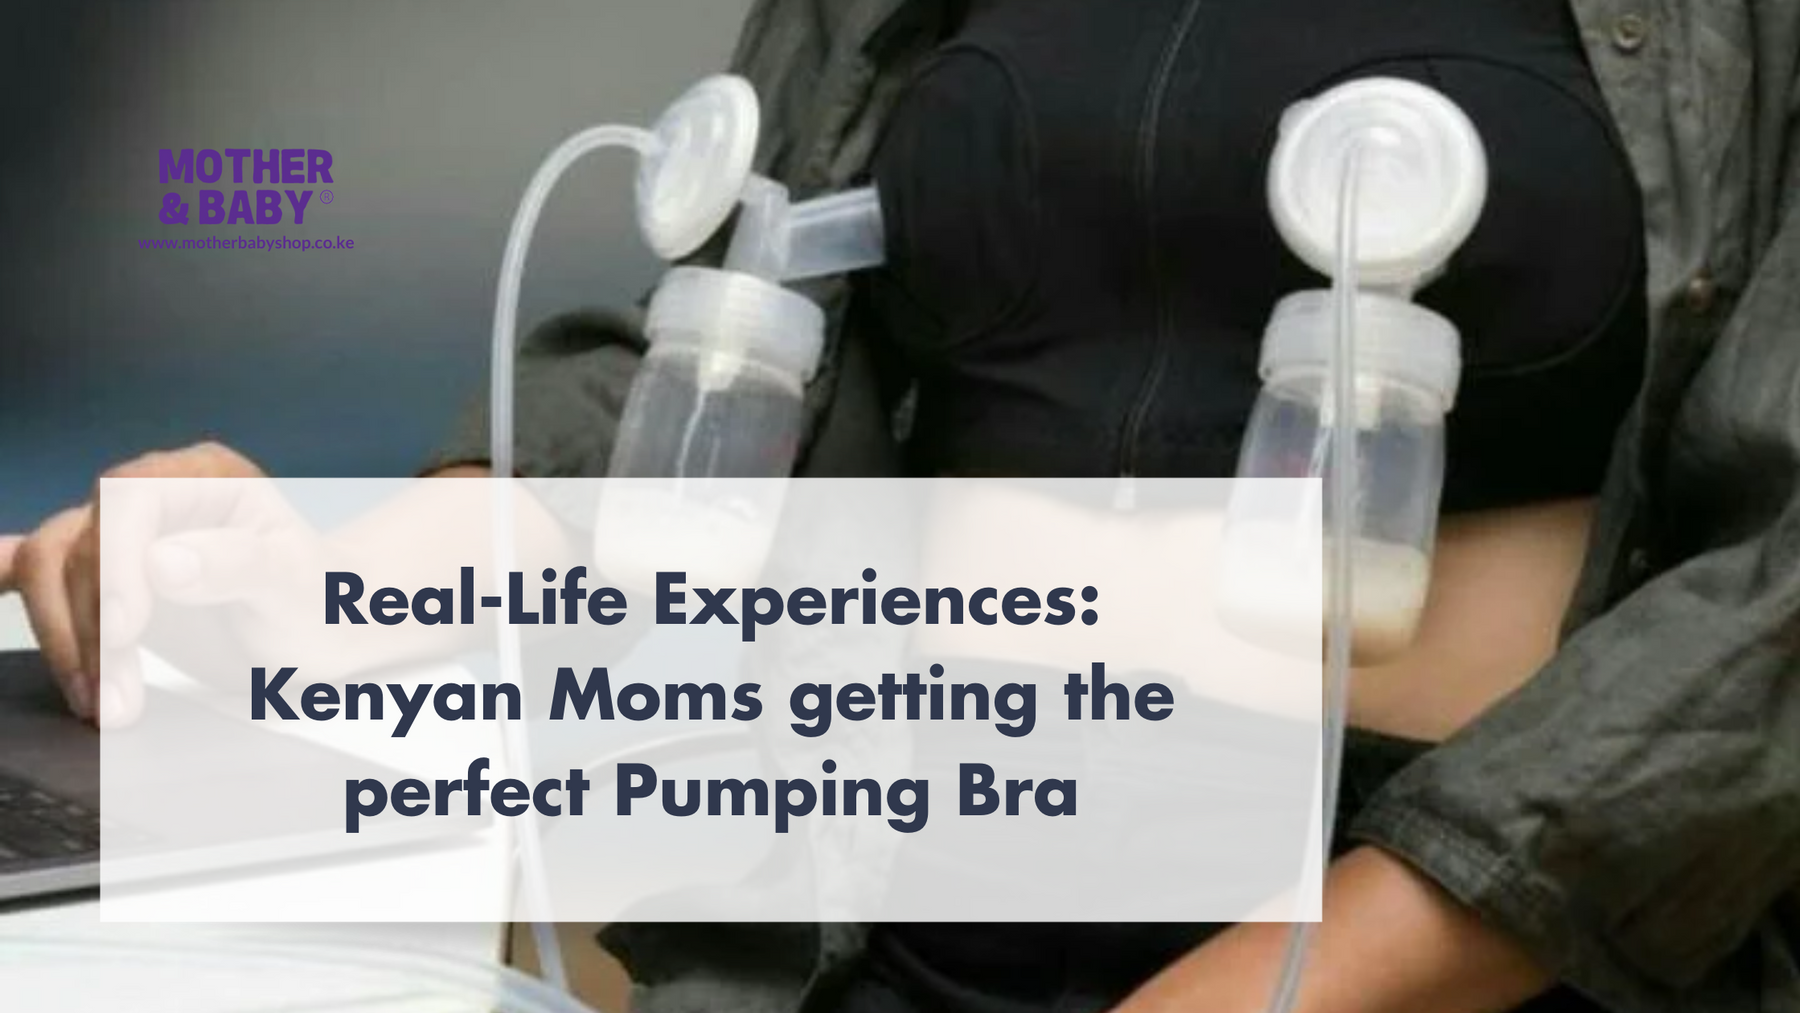 Real-Life Experiences: Kenyan Moms getting the perfect Pumping Bra